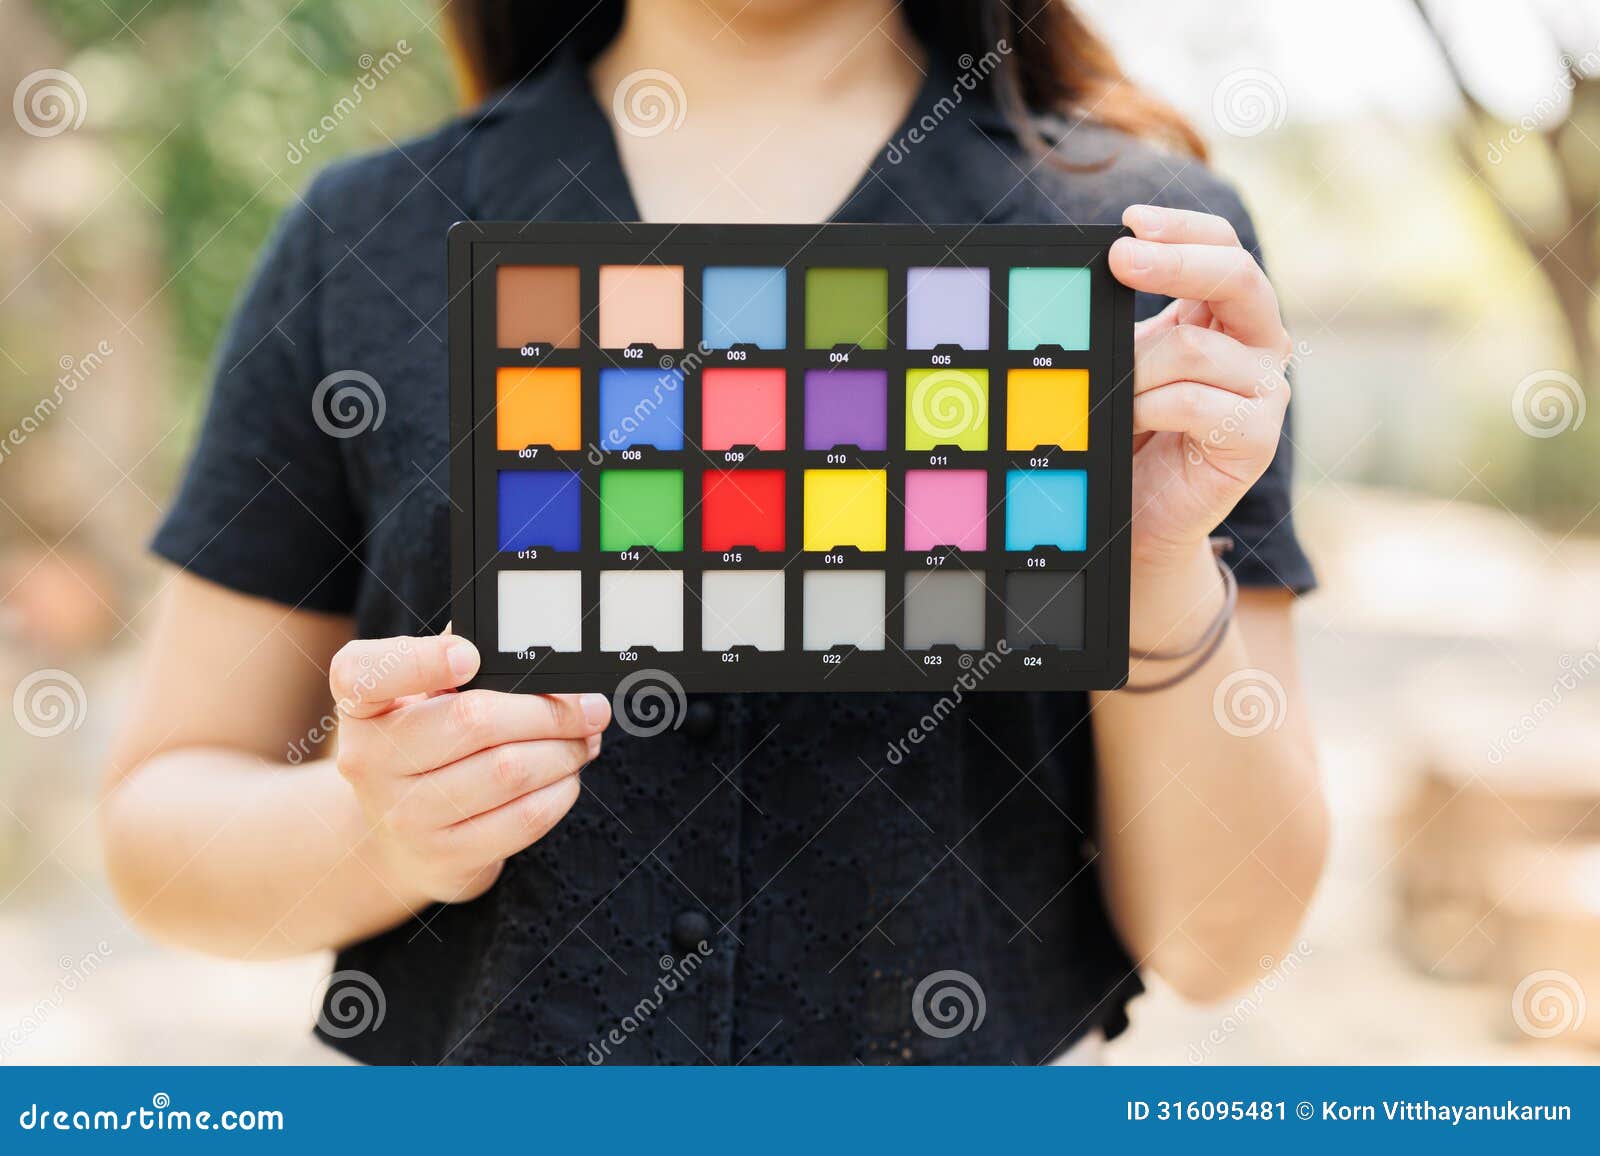 photography model holding color checker board or colors chart for calibrate accurate colors photos or videos